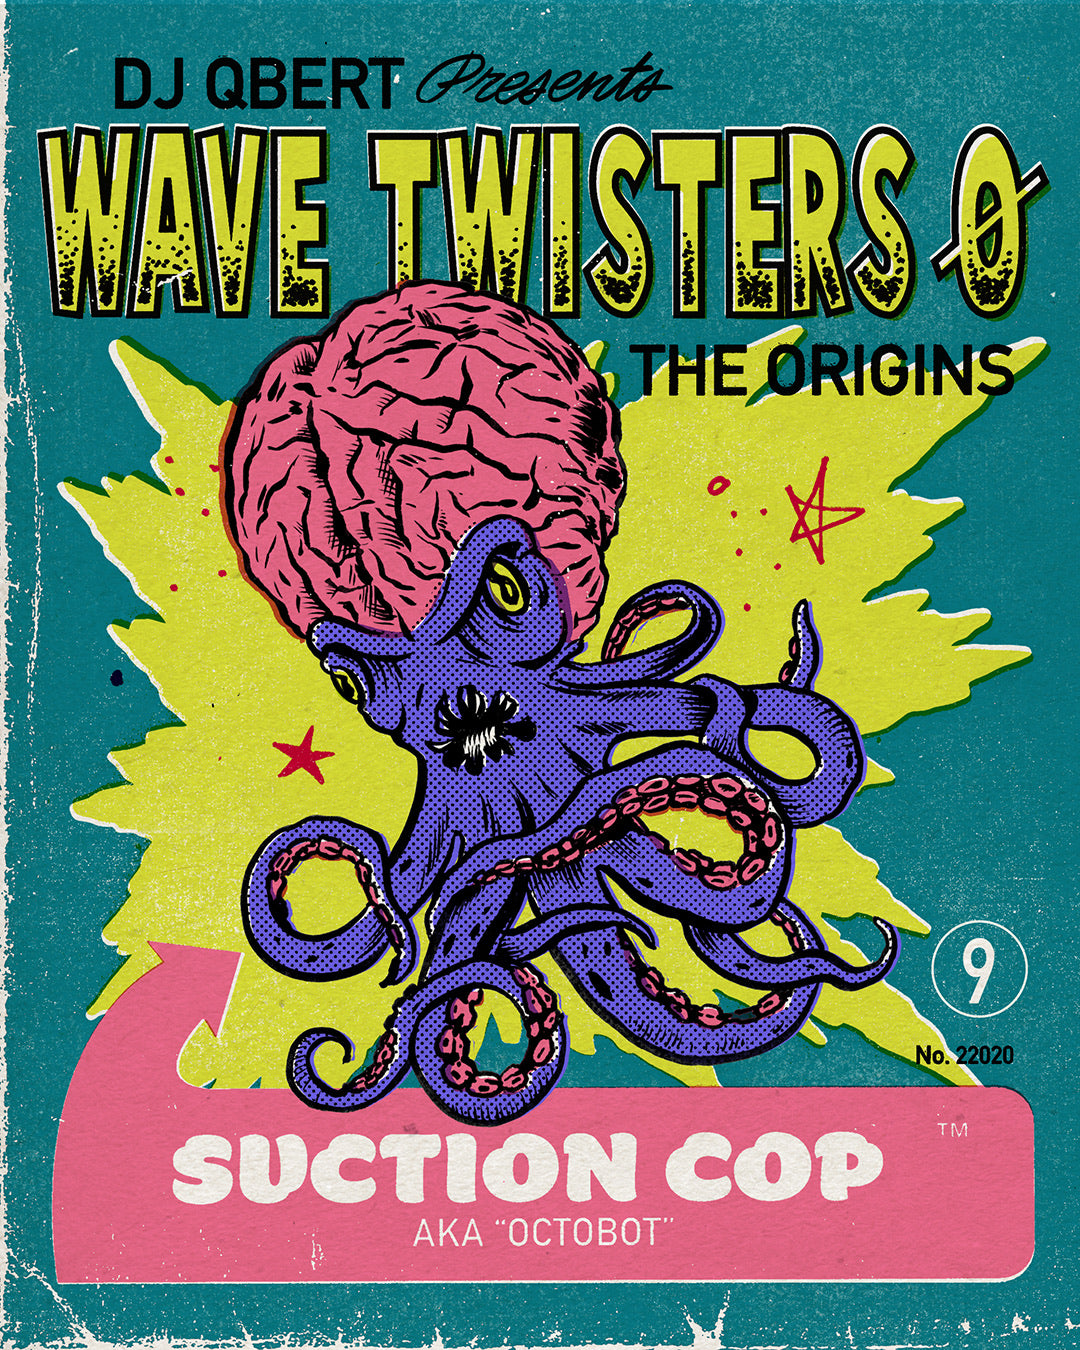 "SUCTION COP"  from "WAVE TWISTERS ZERO: Origins (single Extended version)